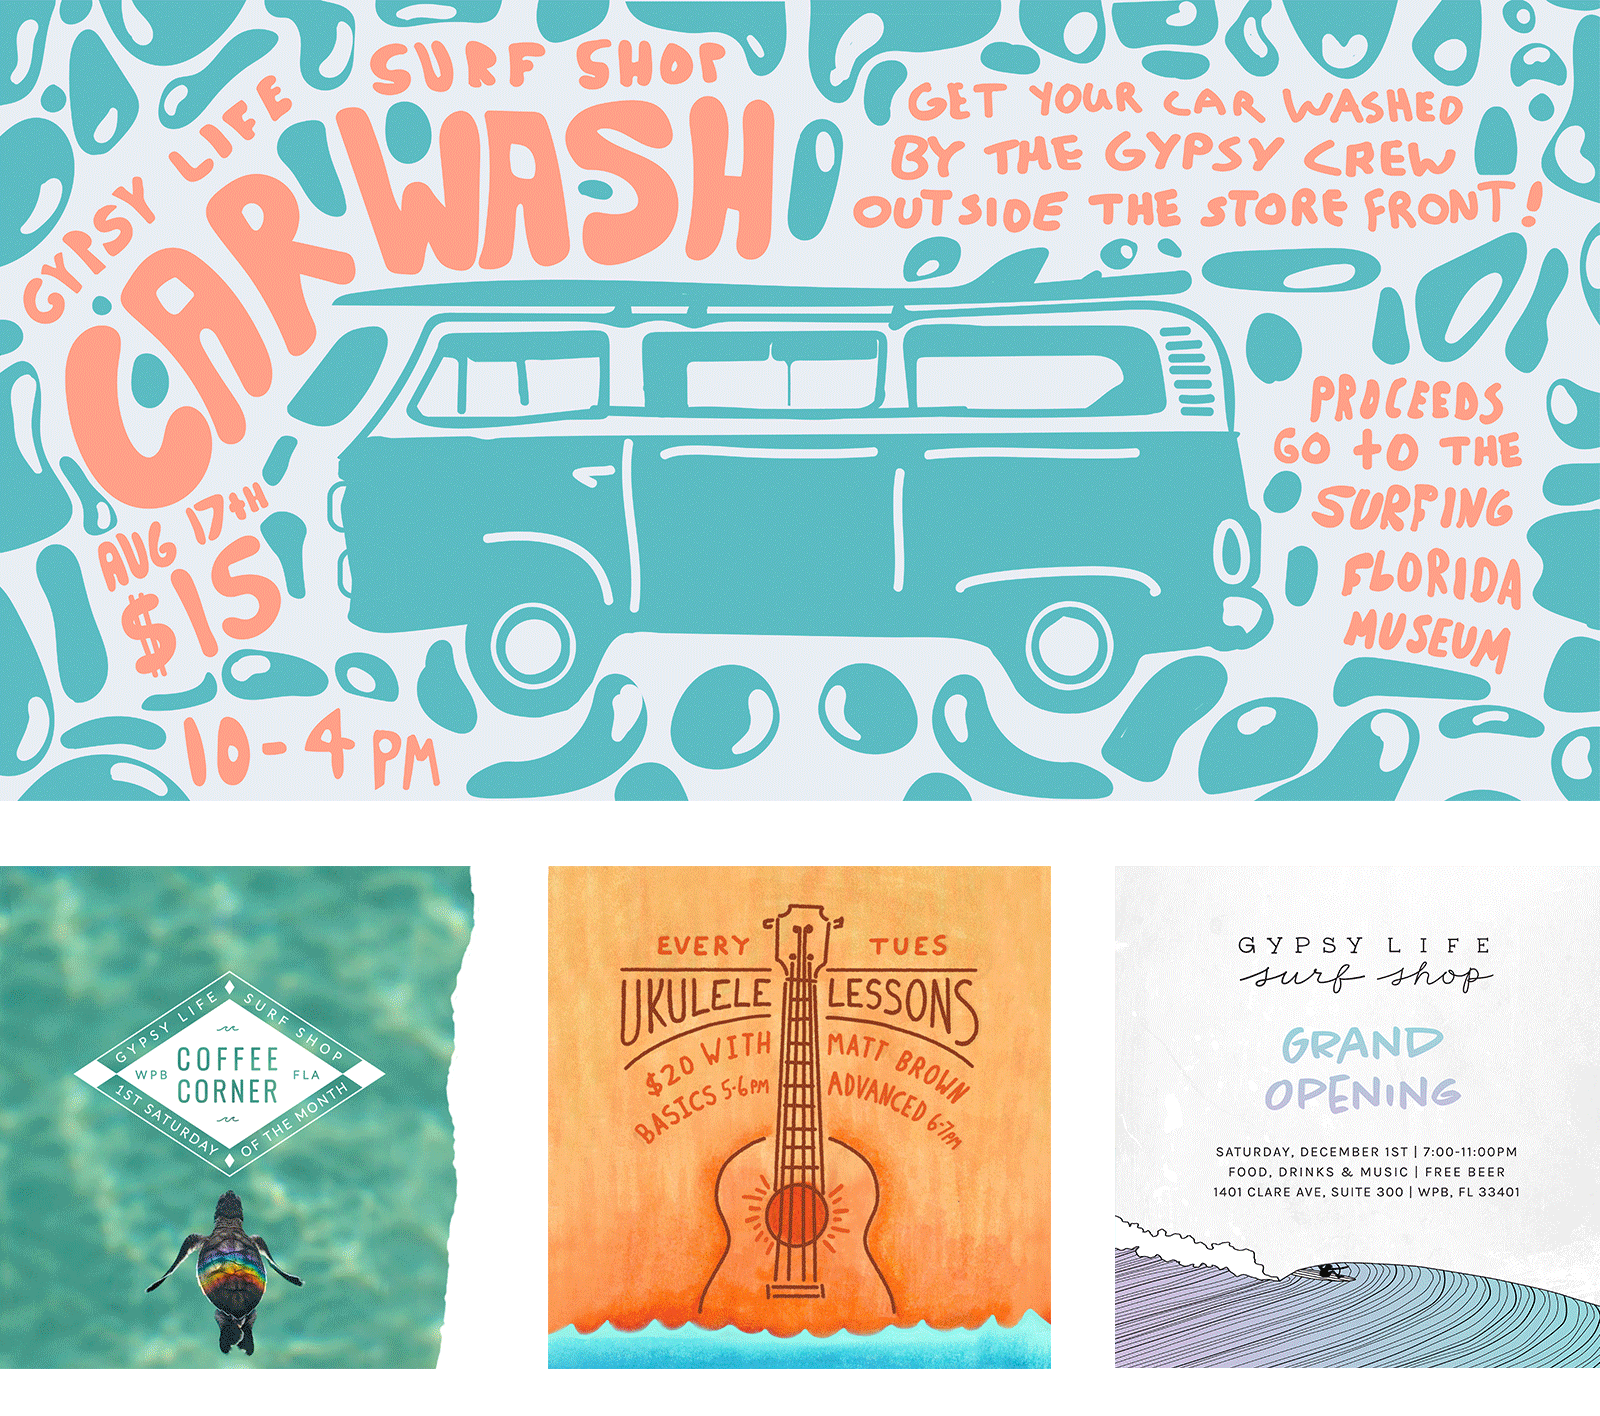 Colorful event graphics created for Gypsy Life Surf Shop in West Palm Beach, Florida. Events include their car wash, coffee corner, ukulele lessons, jam session, national surf day & father's day, and grand opening.